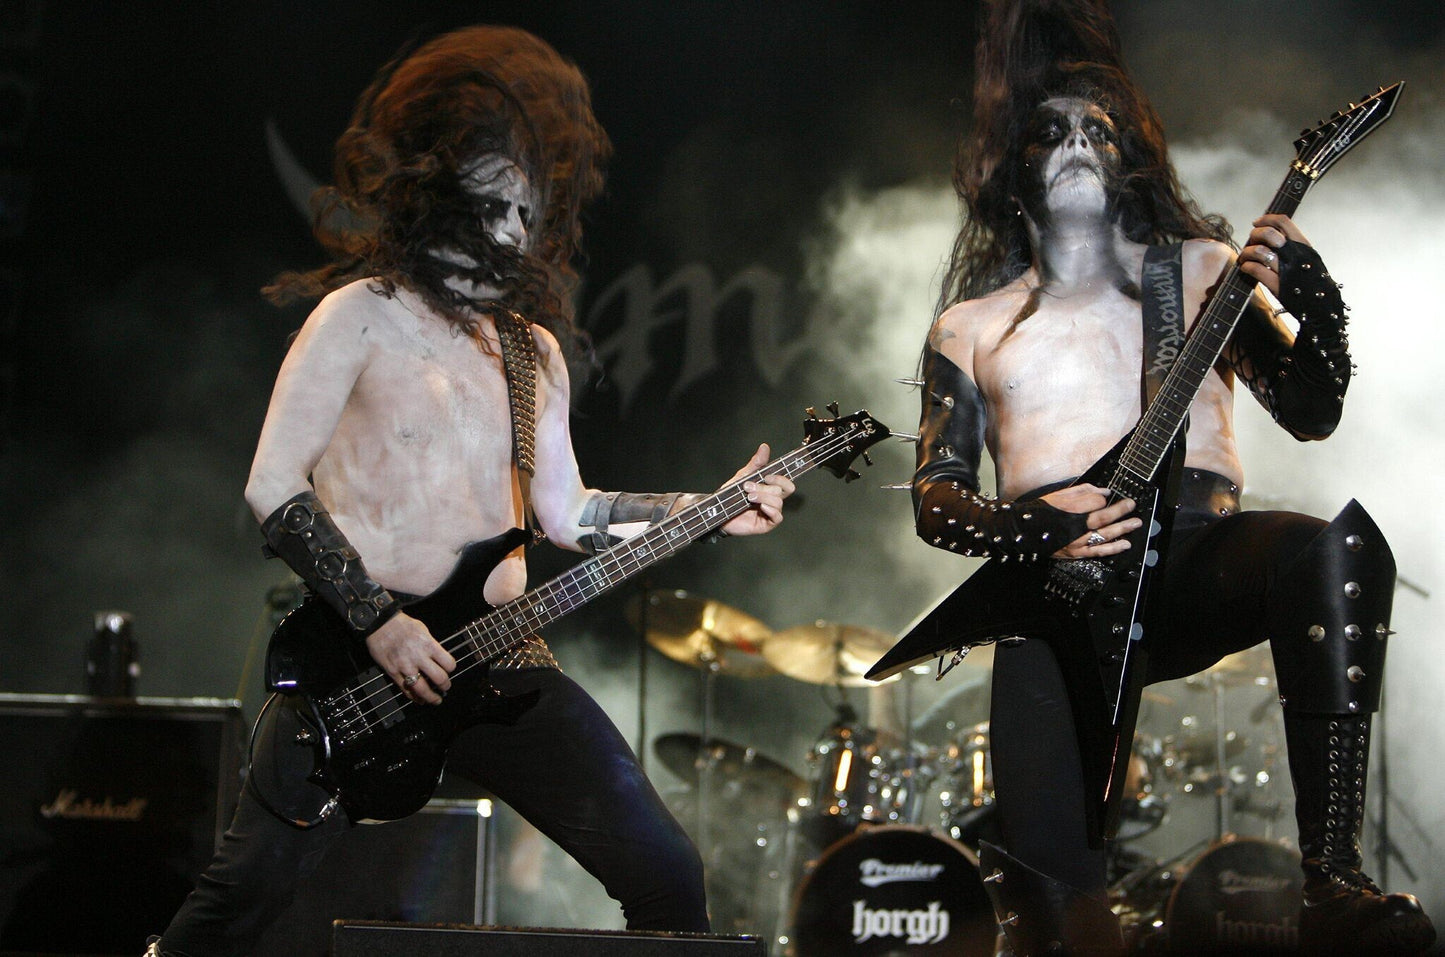 Immortal - Abbath and Apollyon Crushing the Stage, Germany, 2007 Poster (1/3)